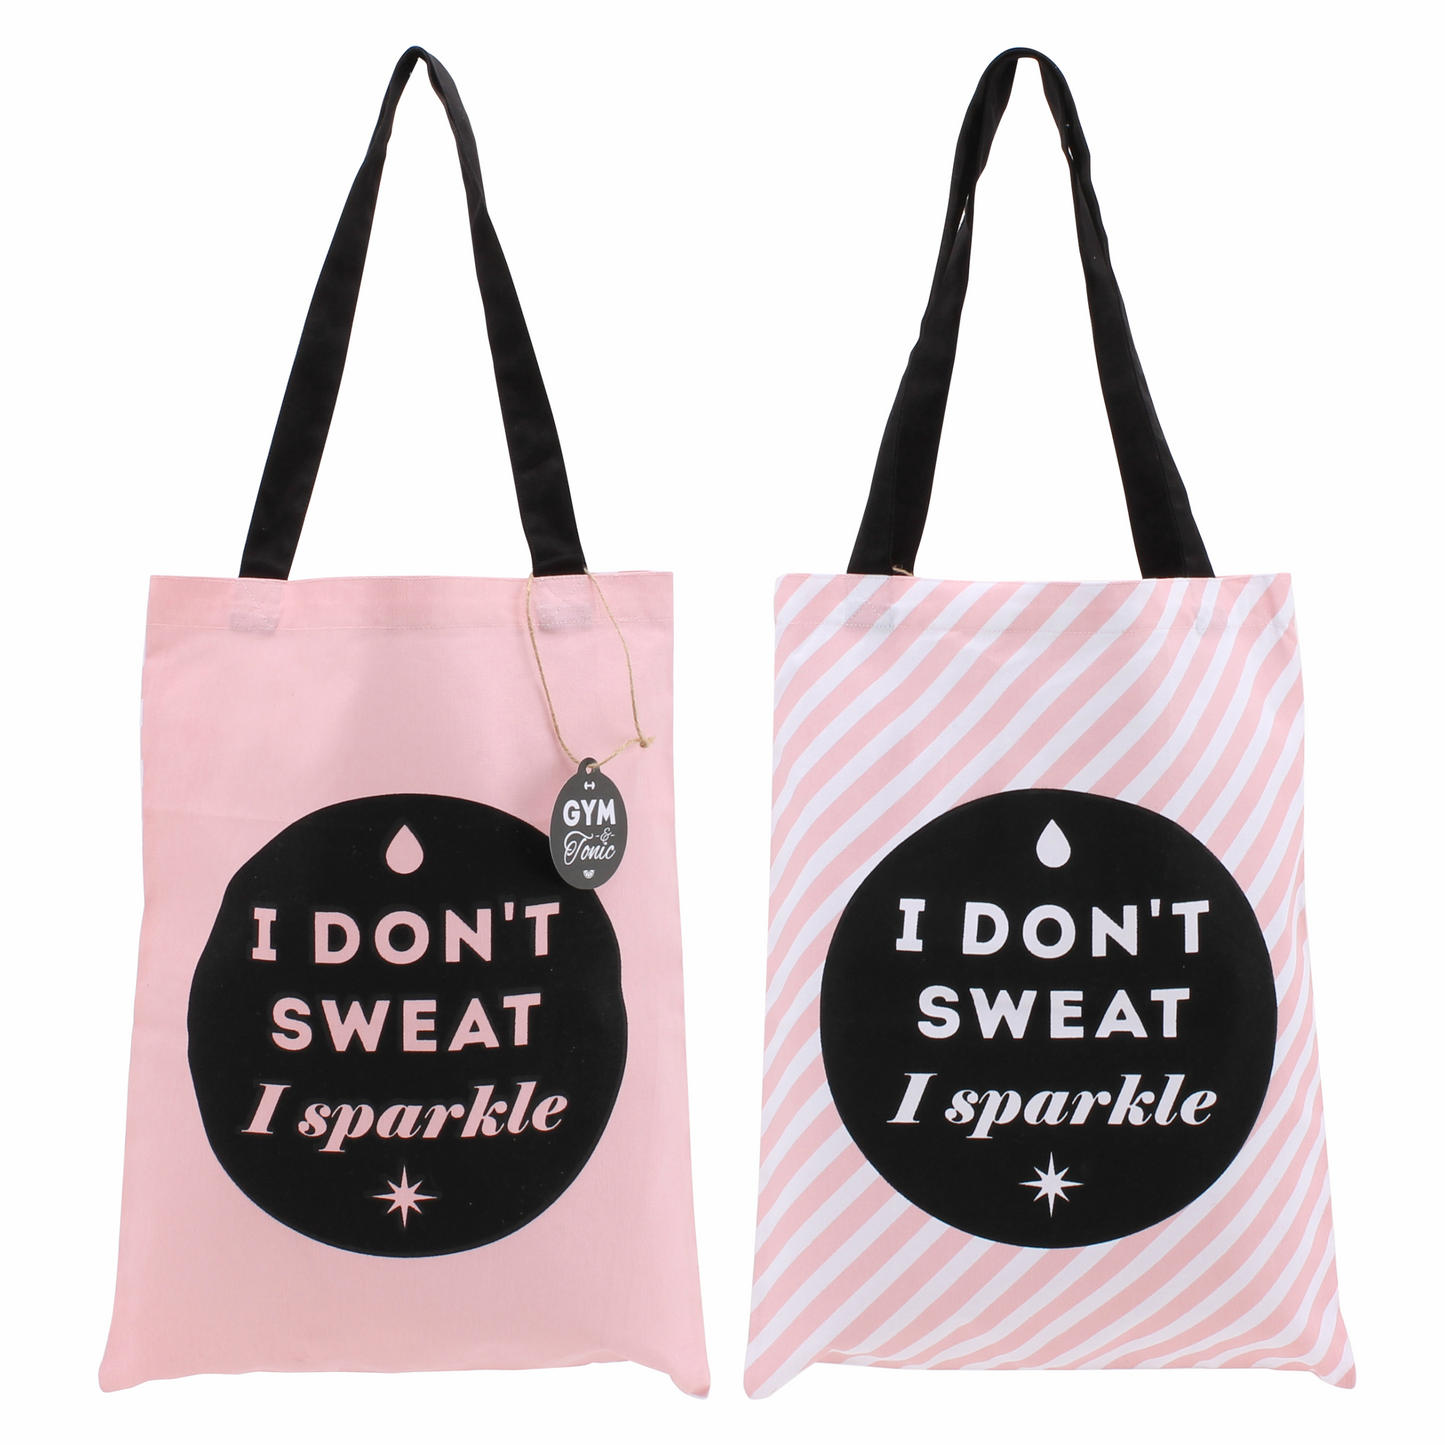 Pink Canvas Shopper Tote Bag with slogan I Don't Sweat I Sparkle